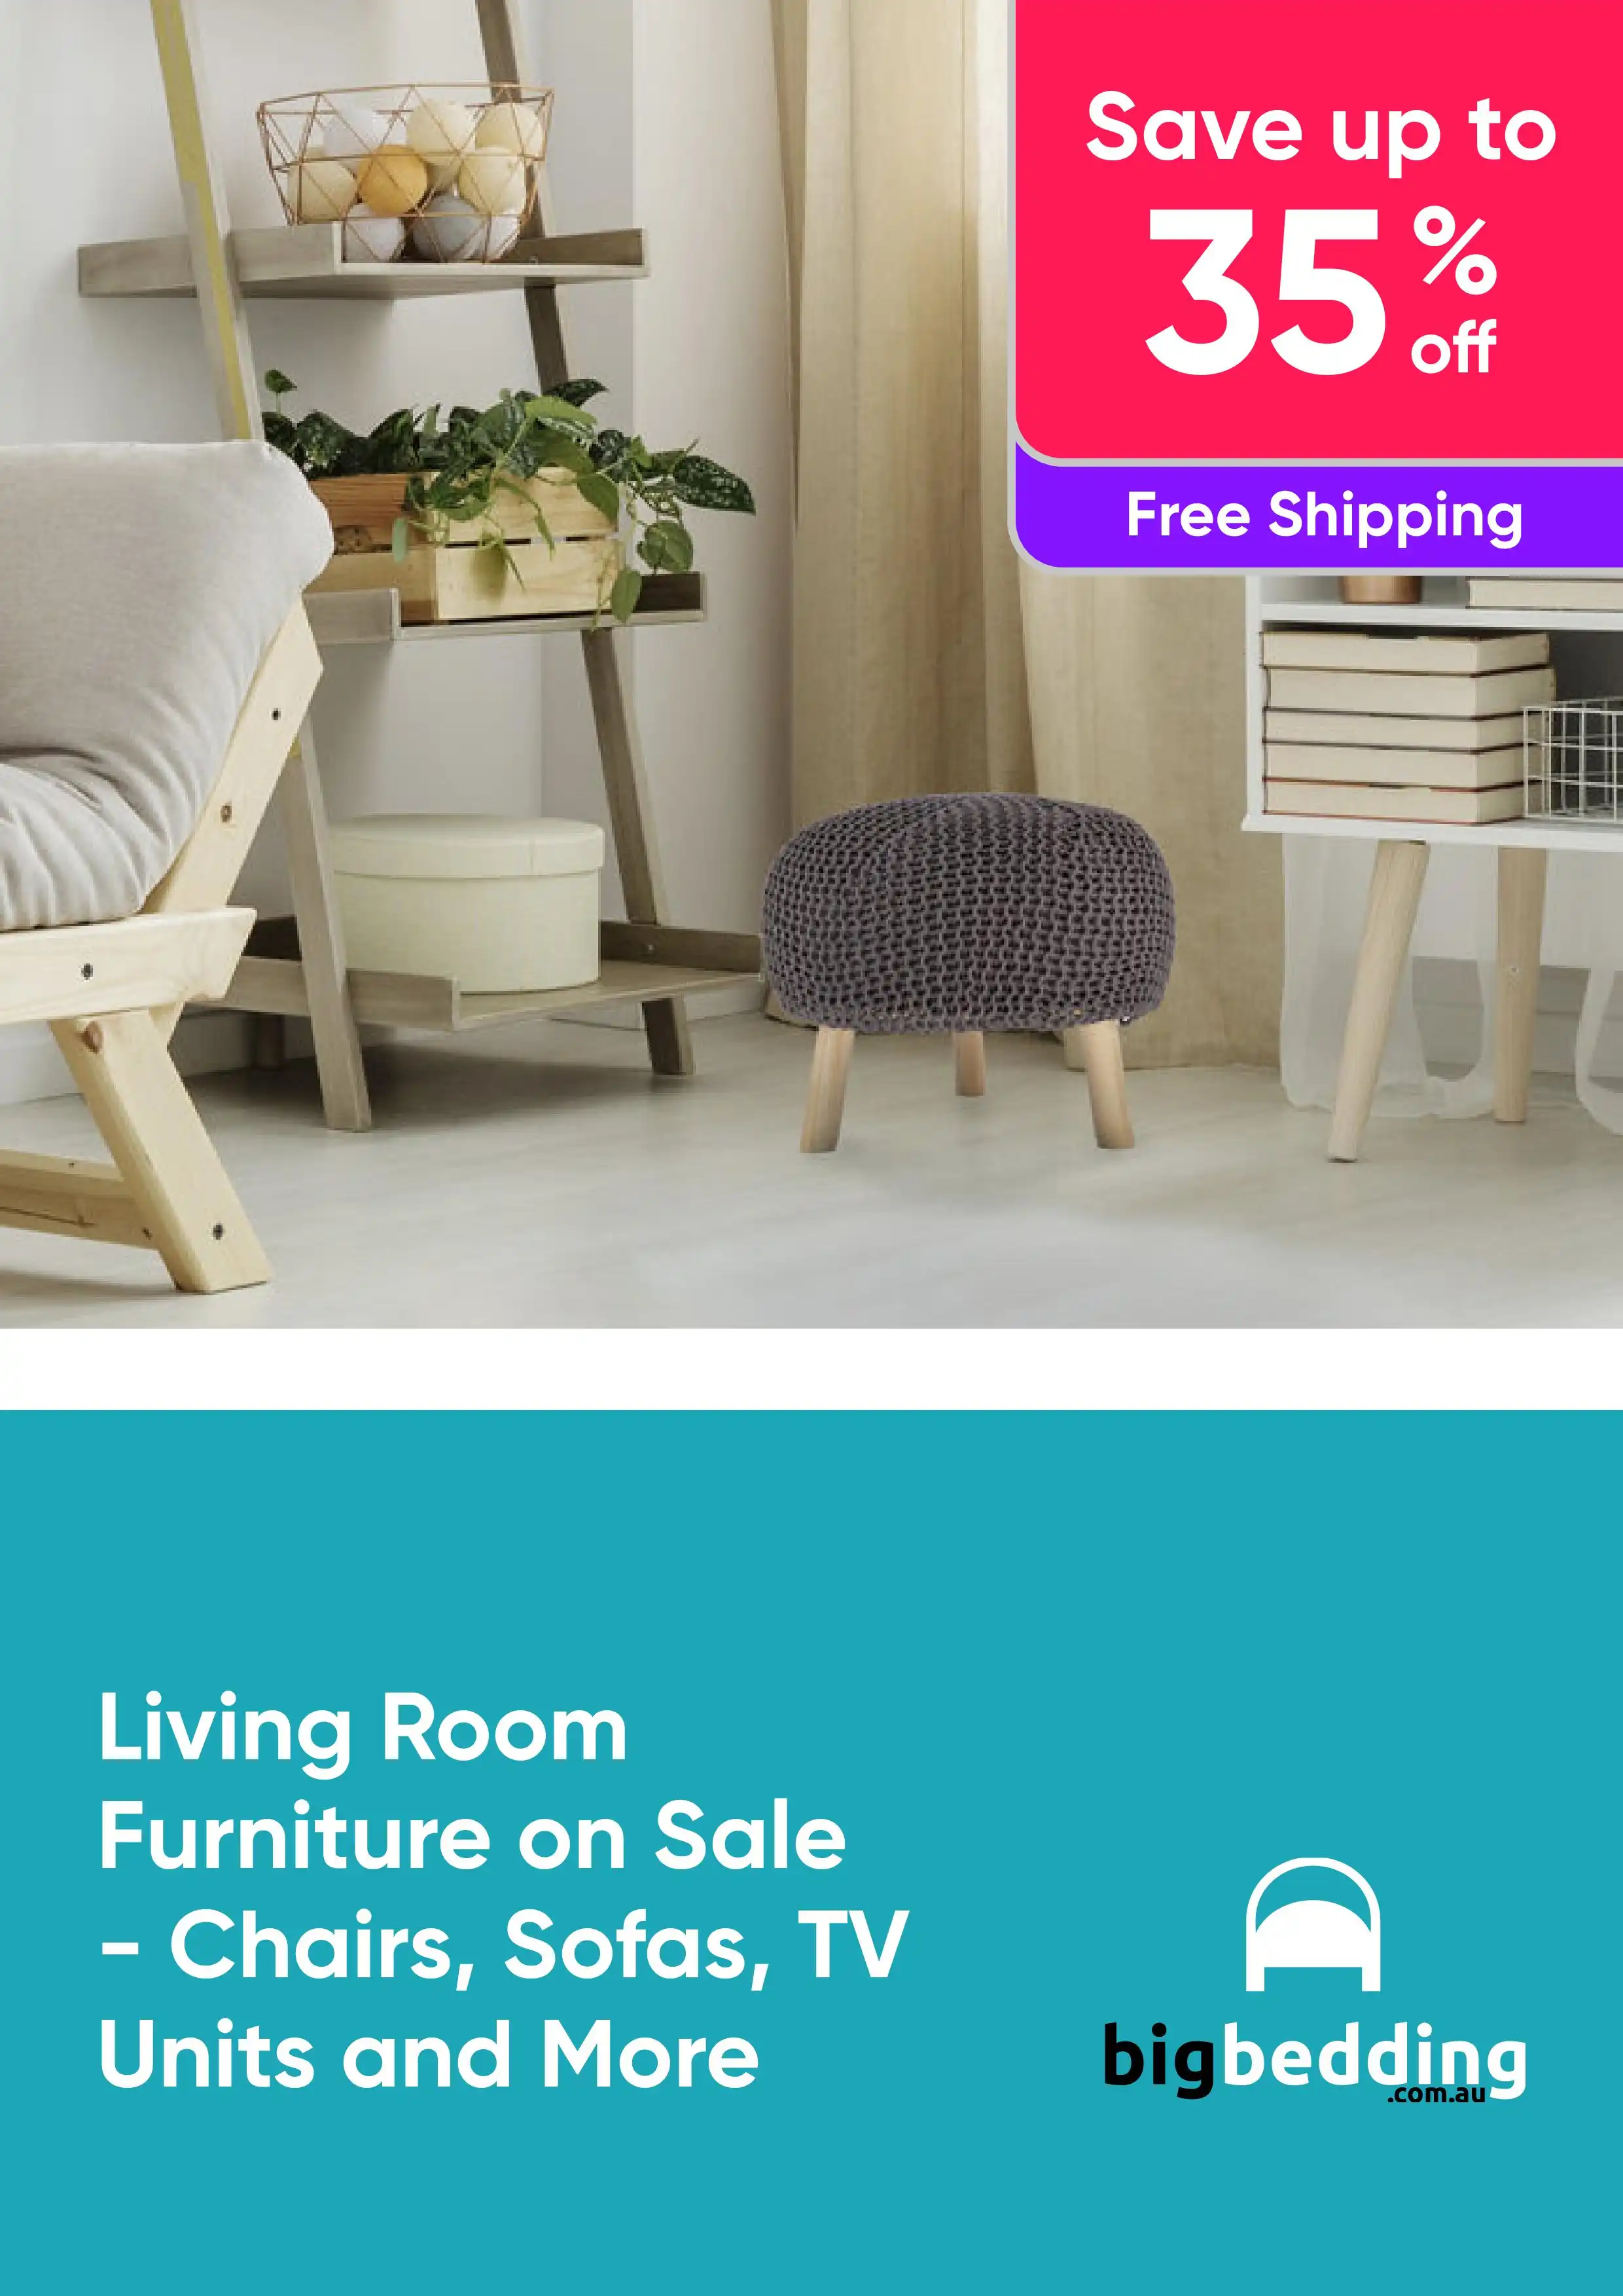 Living Room Furniture on Sale - Save up to 35% on Chairs, Sofas, TV Units